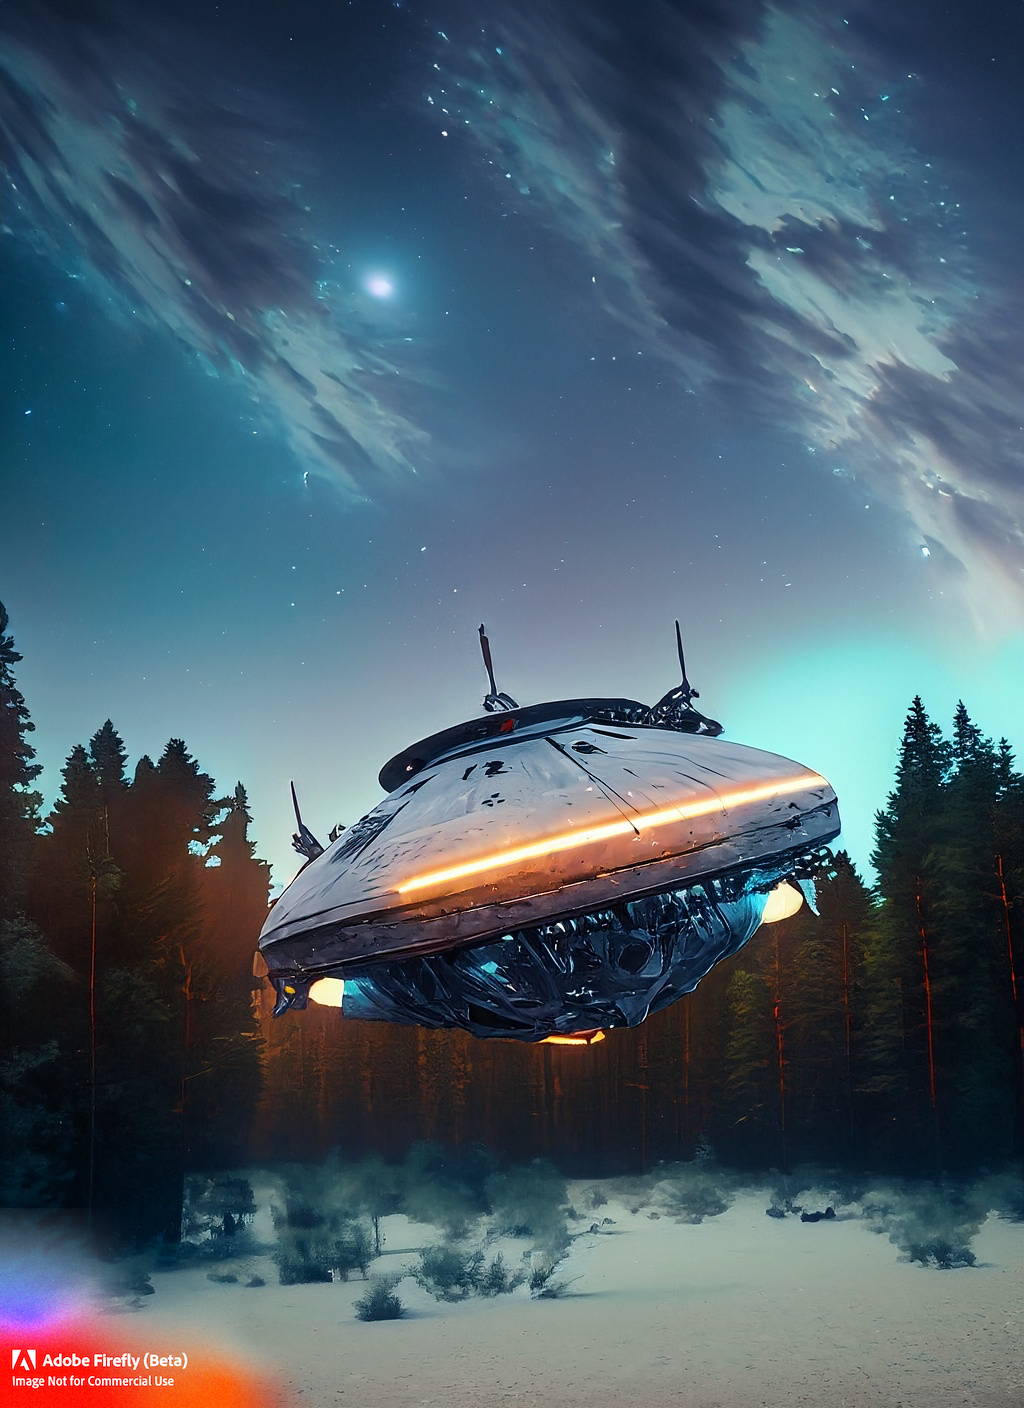 Firefly spaceship hovering in the Scandinavian forest night sky 19945